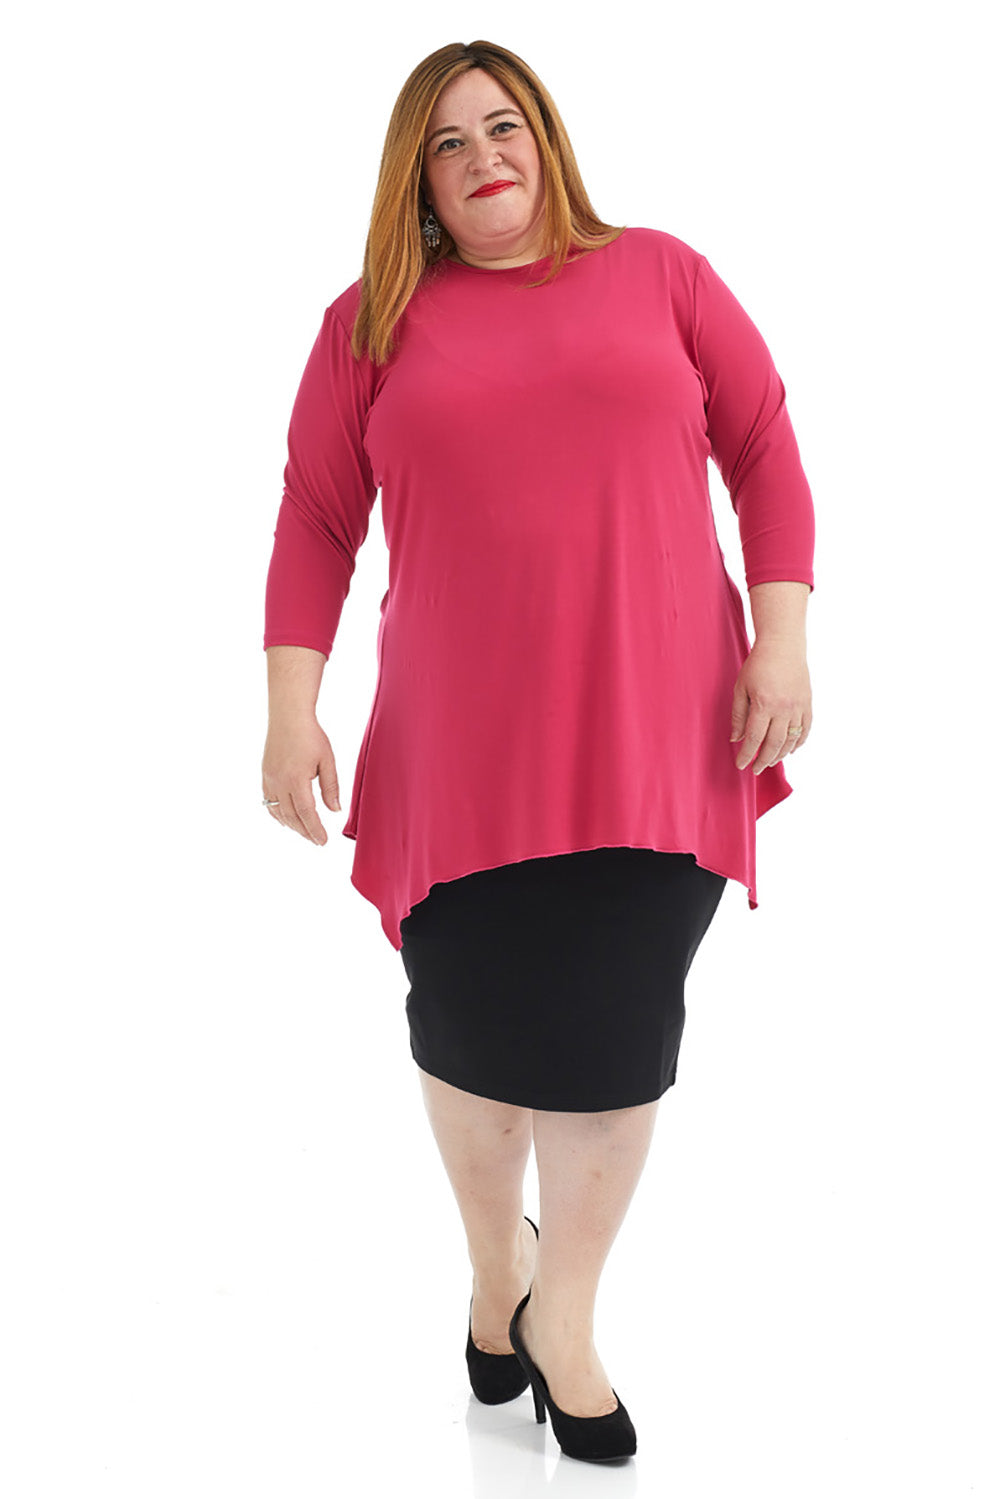 black modest plus size pencil skirt without slit for women